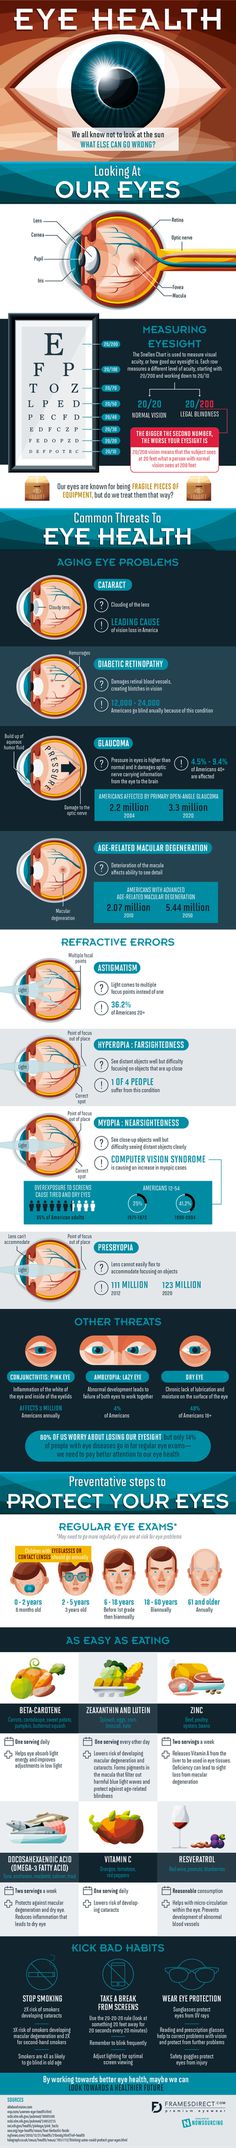 Infographic: What is 20/20 Vision? Are you taking care of your eyesight?